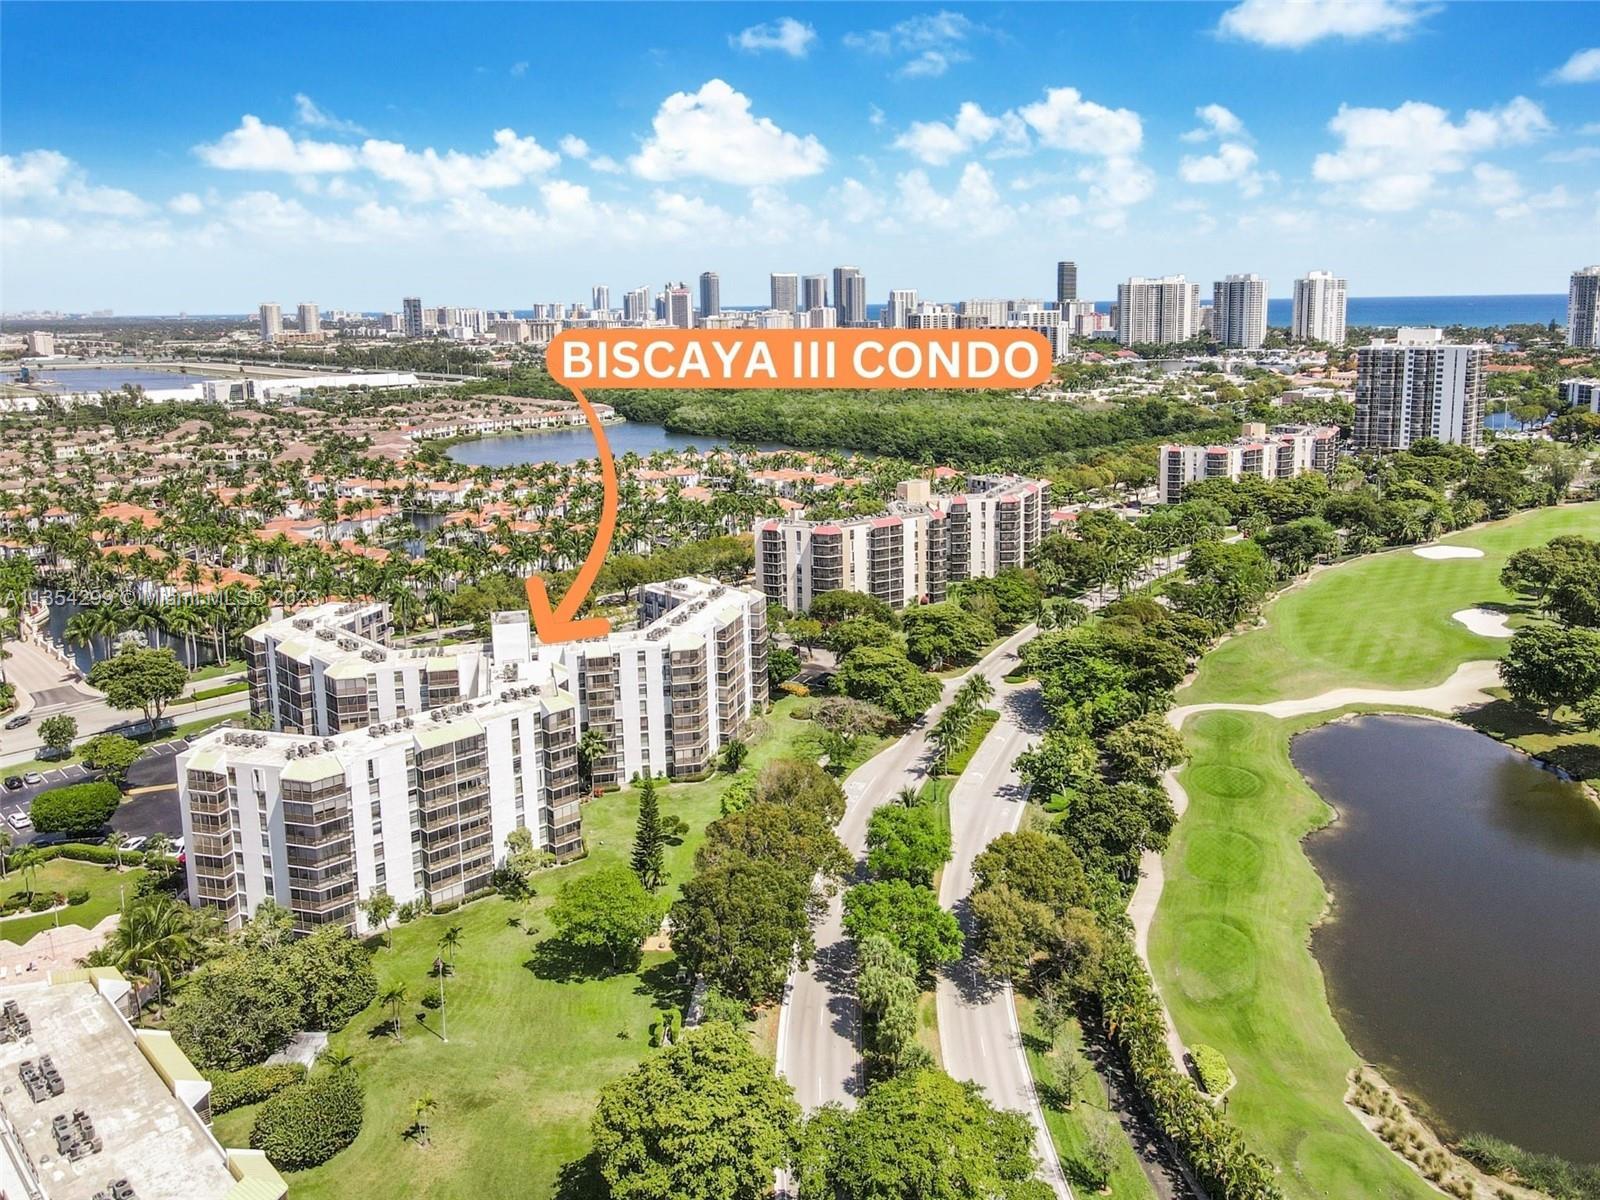 Live in beautiful Aventura, Florida for less than $300k! Lovely ground floor unit in secure 55+ comm